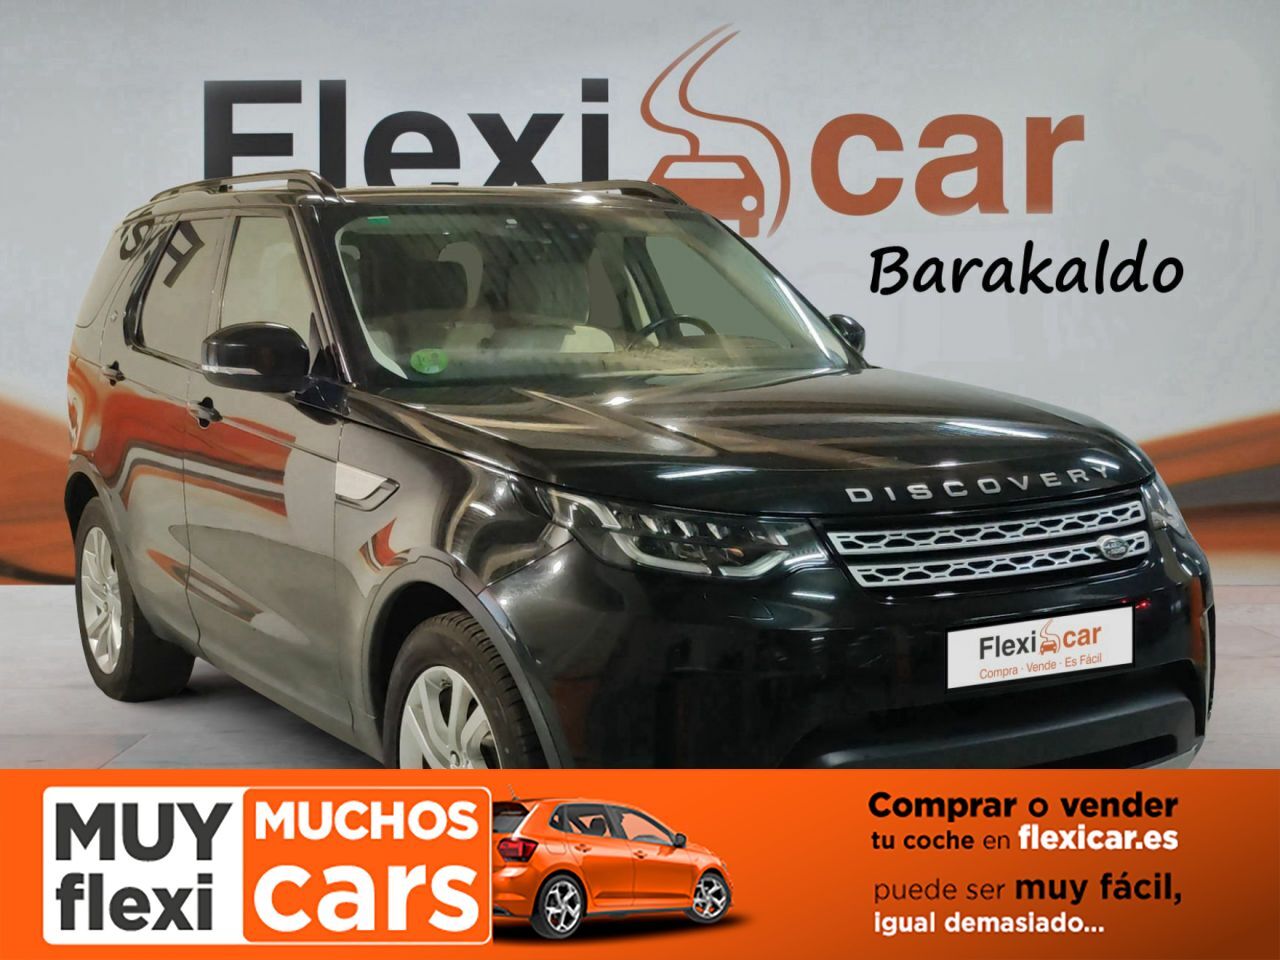 LAND ROVER Discovery (3.0 Si6 HSE Aut.) en Madrid